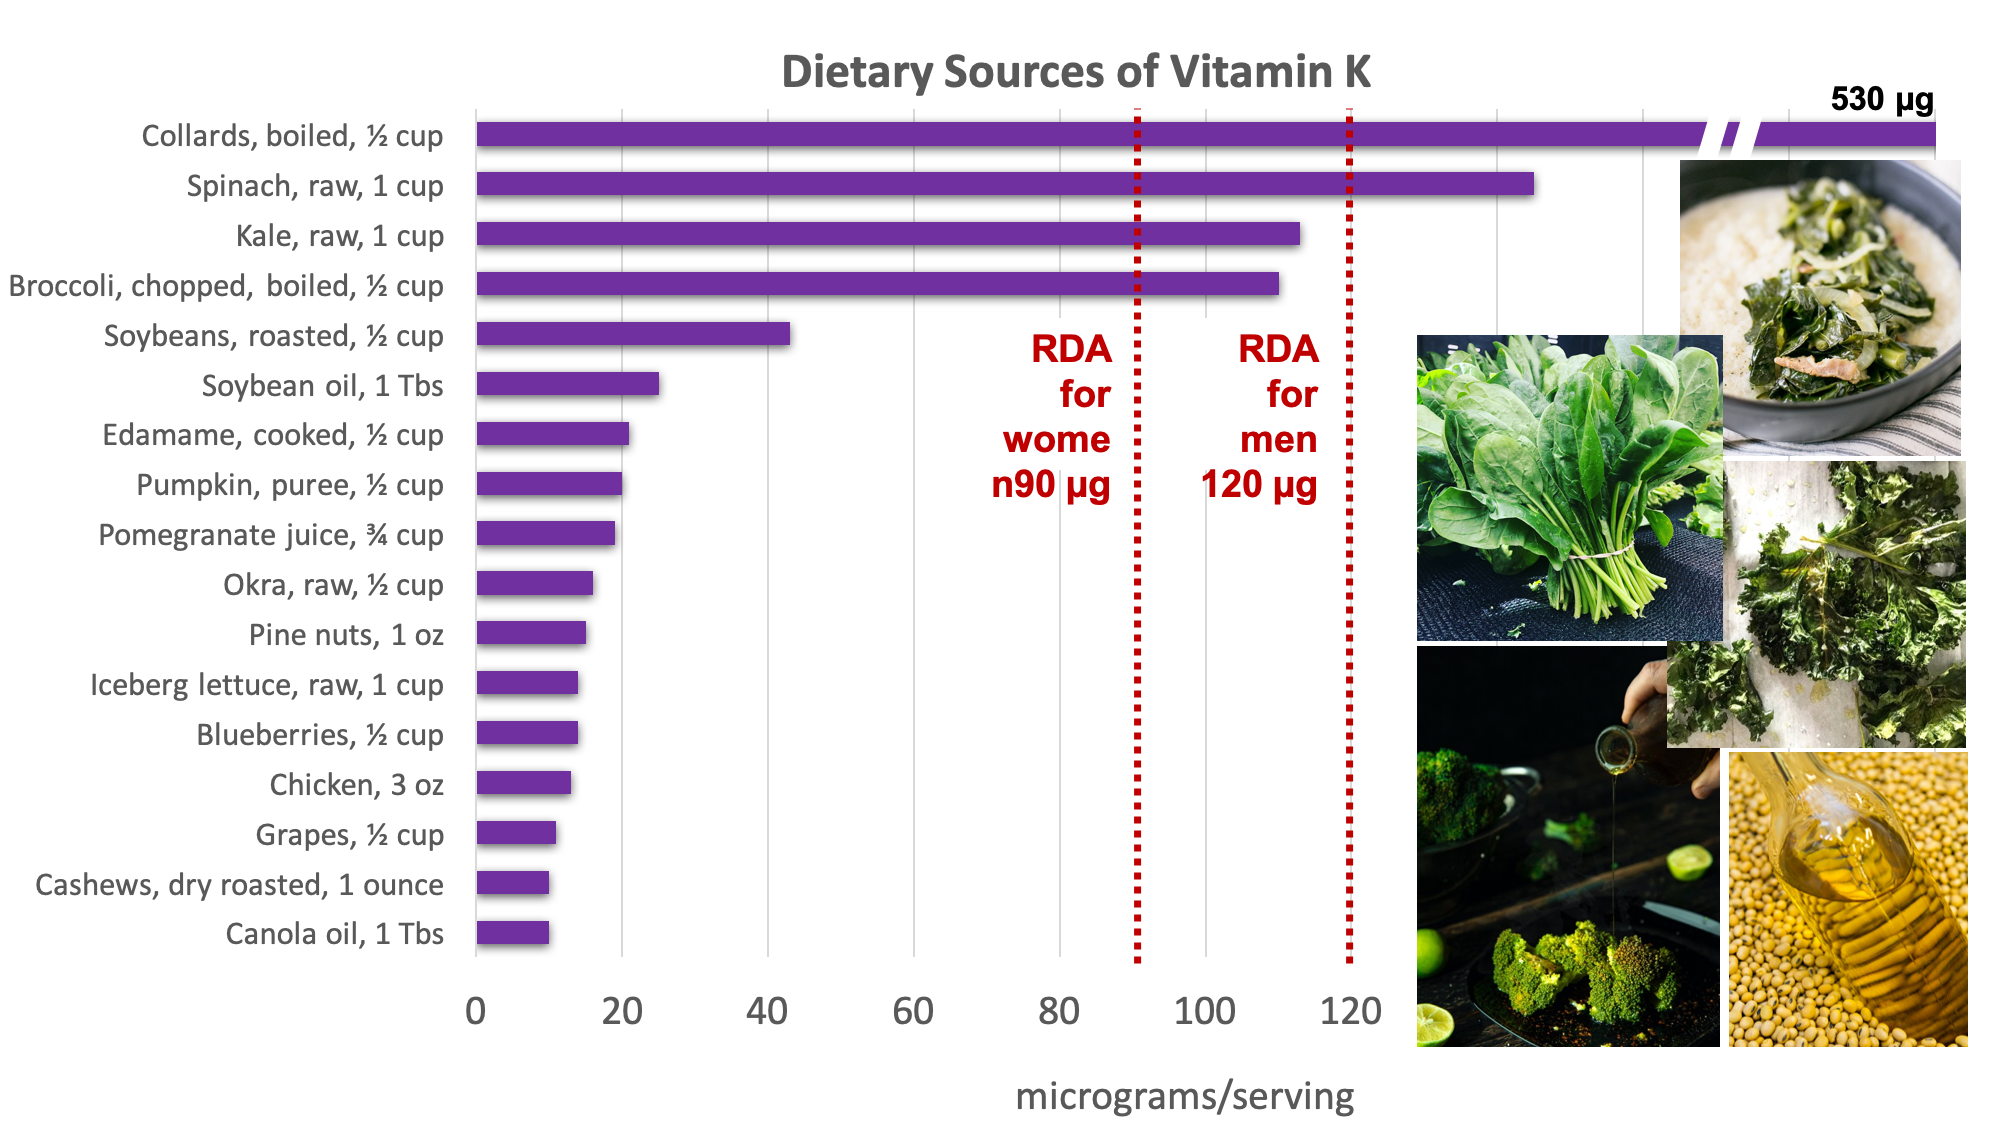 Bar graph showing dietary sources of vitamin K compared with the RDA for adult women of 90 micrograms and for men of 120 micrograms. Top sources include dark leafy green, broccoli, soybeans, vegetable oils, edamame, pumpkin, pomegranate juice, nuts, some fruits. Sources pictured include collards, spinach, kale, broccoli, and vegetable oils.